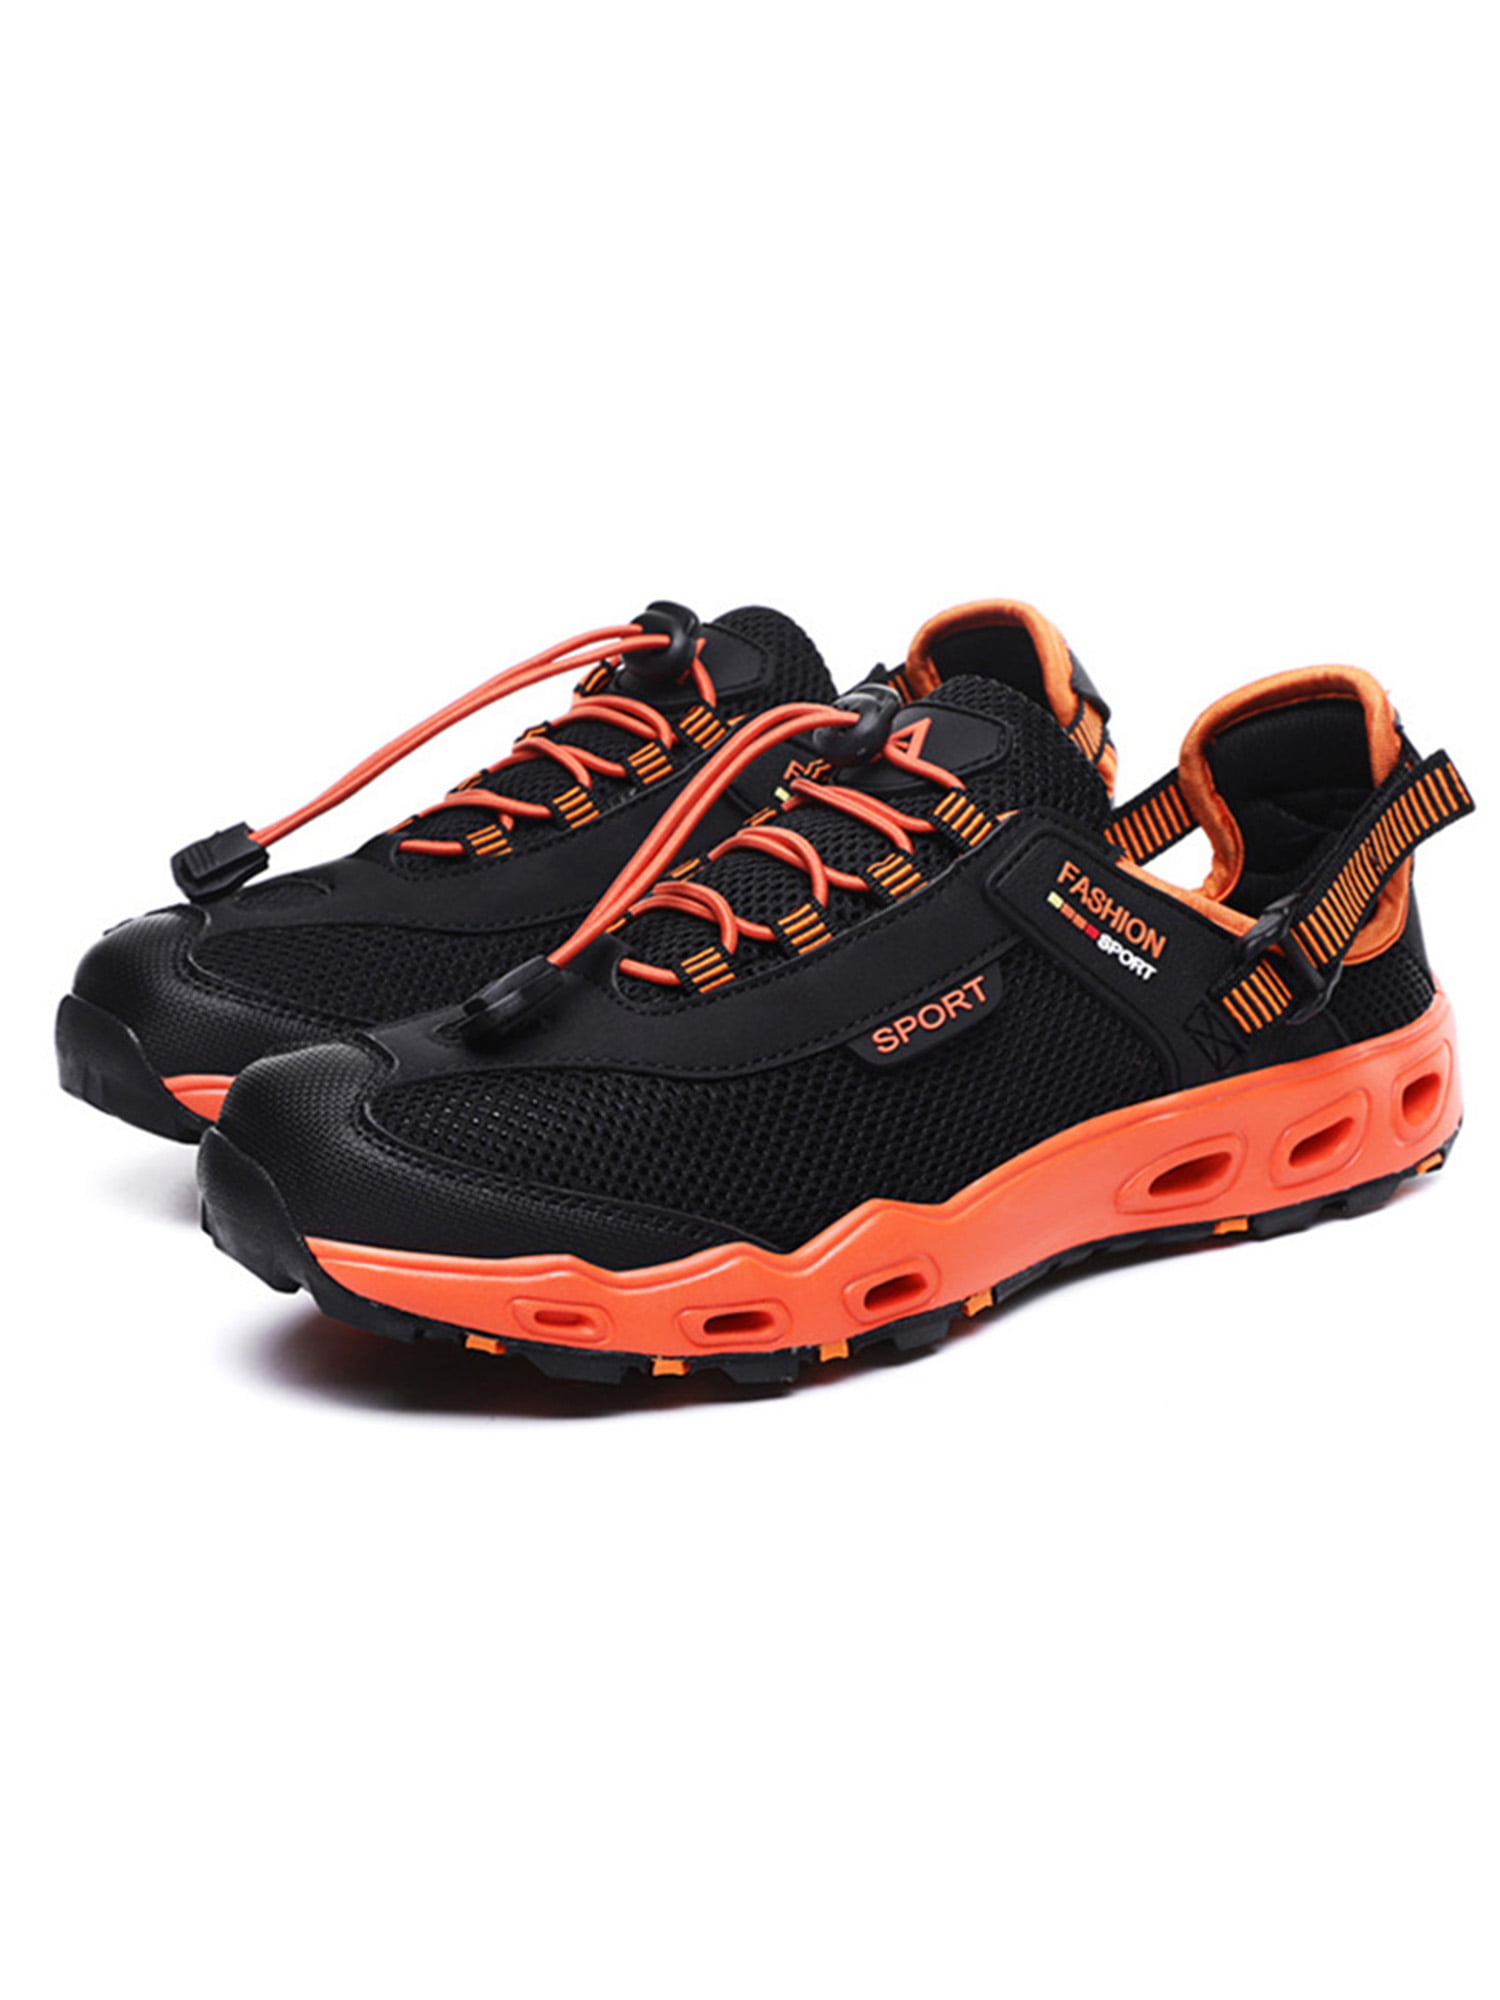 Details about   Hot Men's Trail Hiking Outdoor Snekaers Mesh Breathable Water River Sports Shoes 